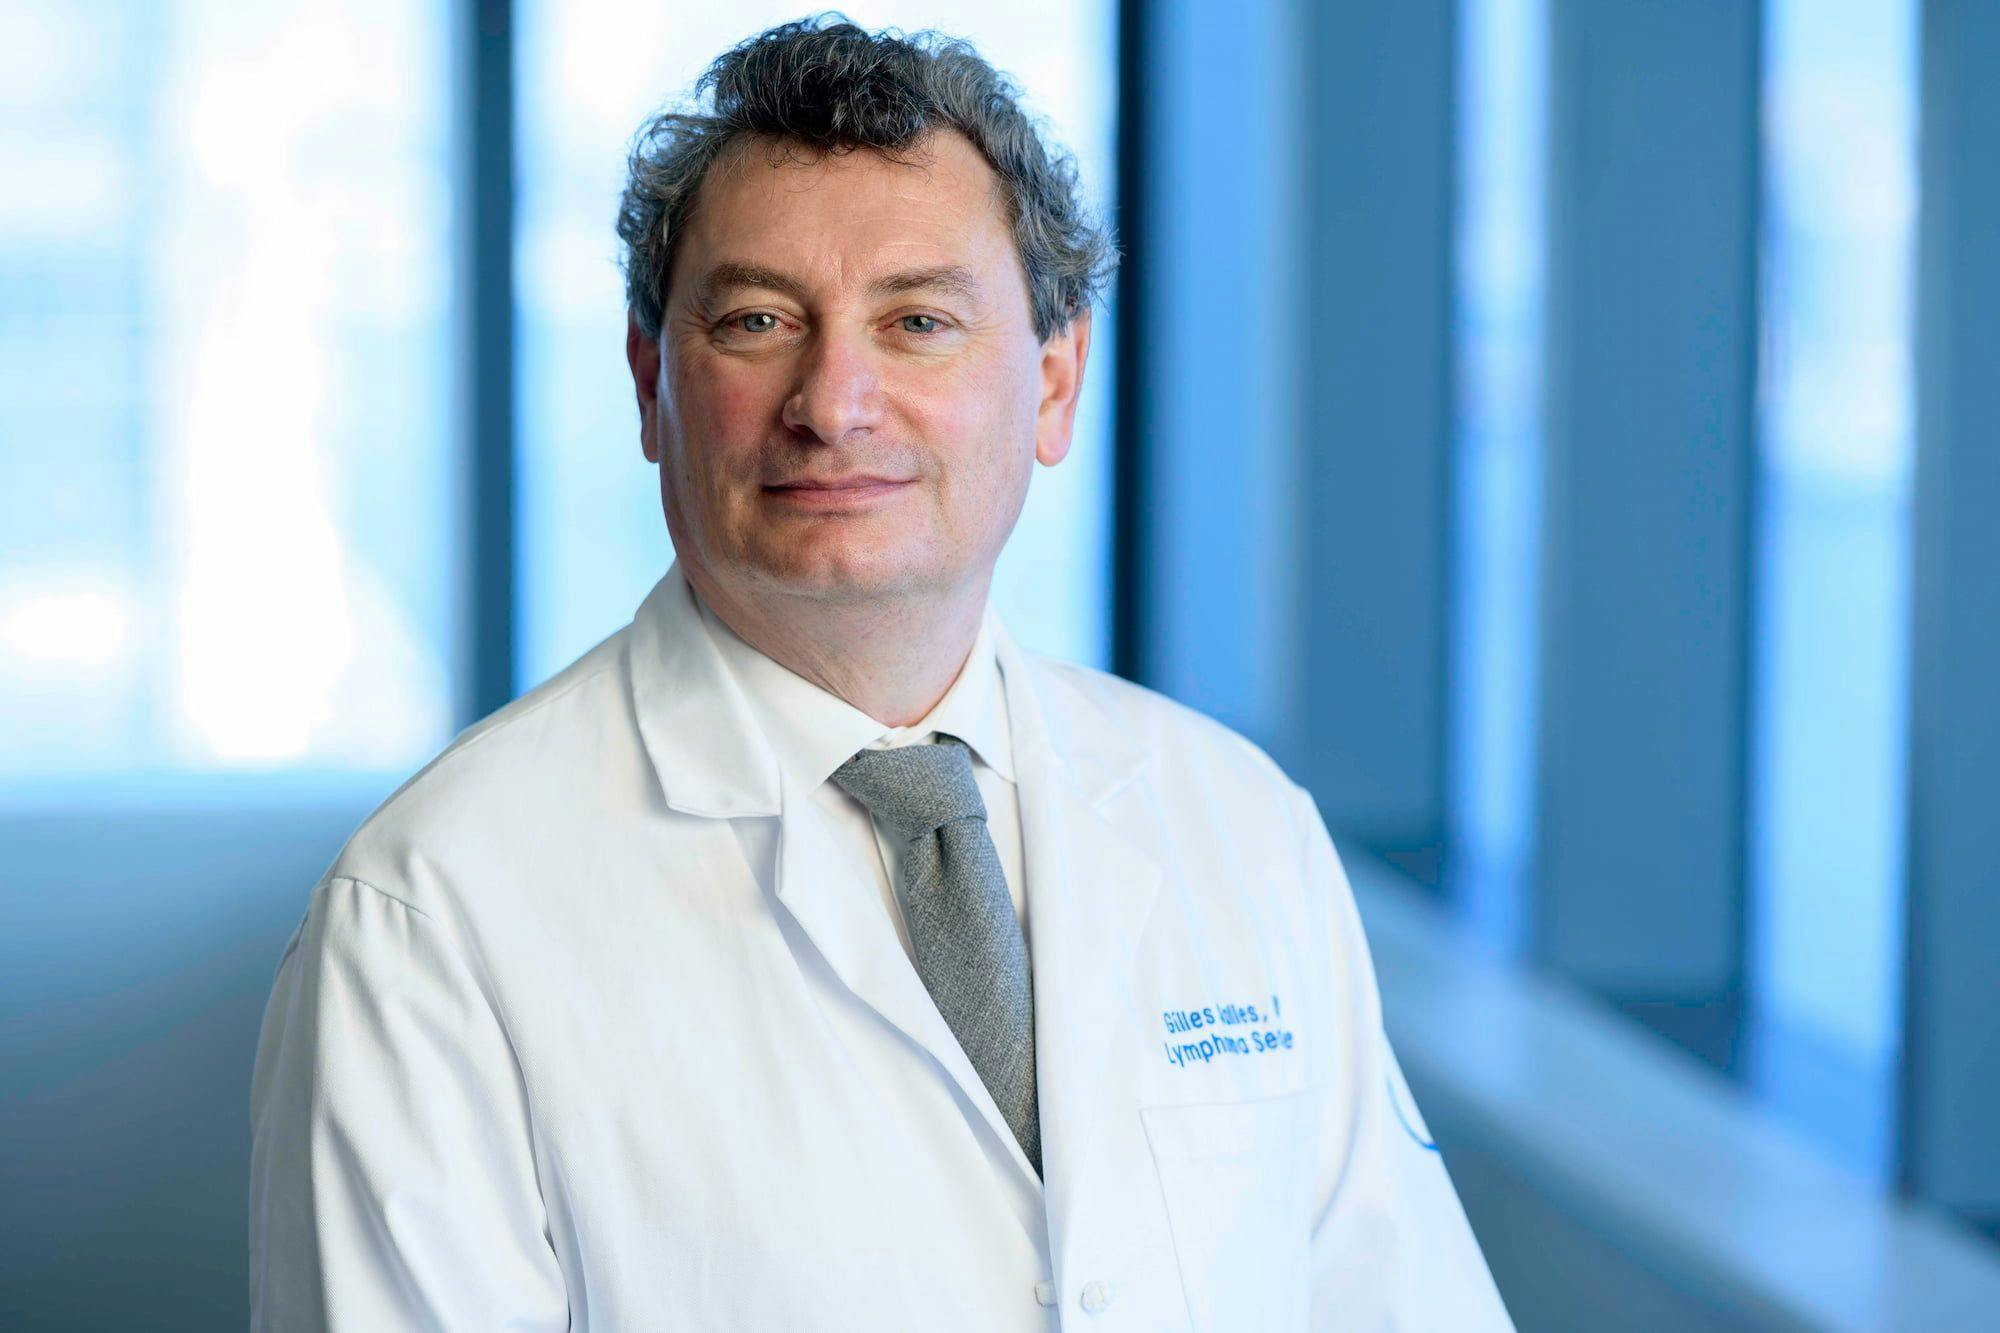 Gilles Salles, MD

Chief of Lymphoma Service

Steven A. Greenberg Chair

Memorial Sloan Kettering Cancer Center

New York, NY